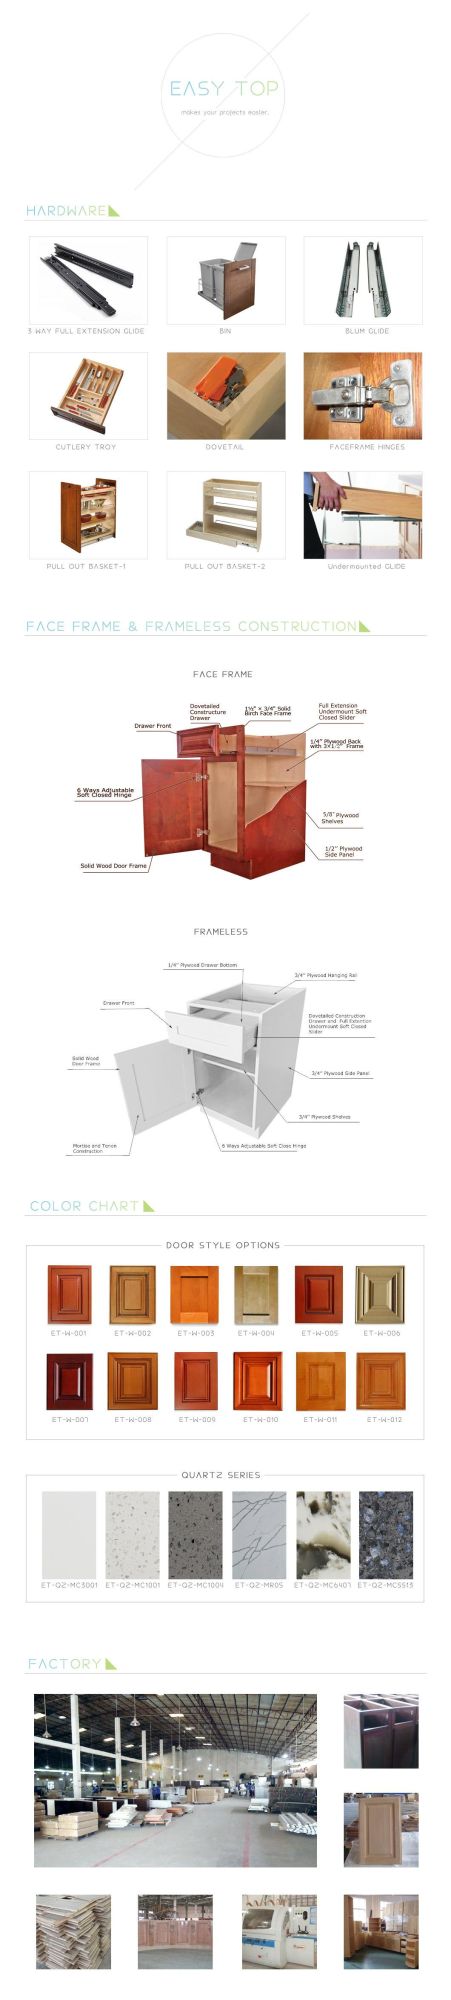 Customized Hotel Classic Style Deep Used Wooden Bathroom Vanity Cabinet